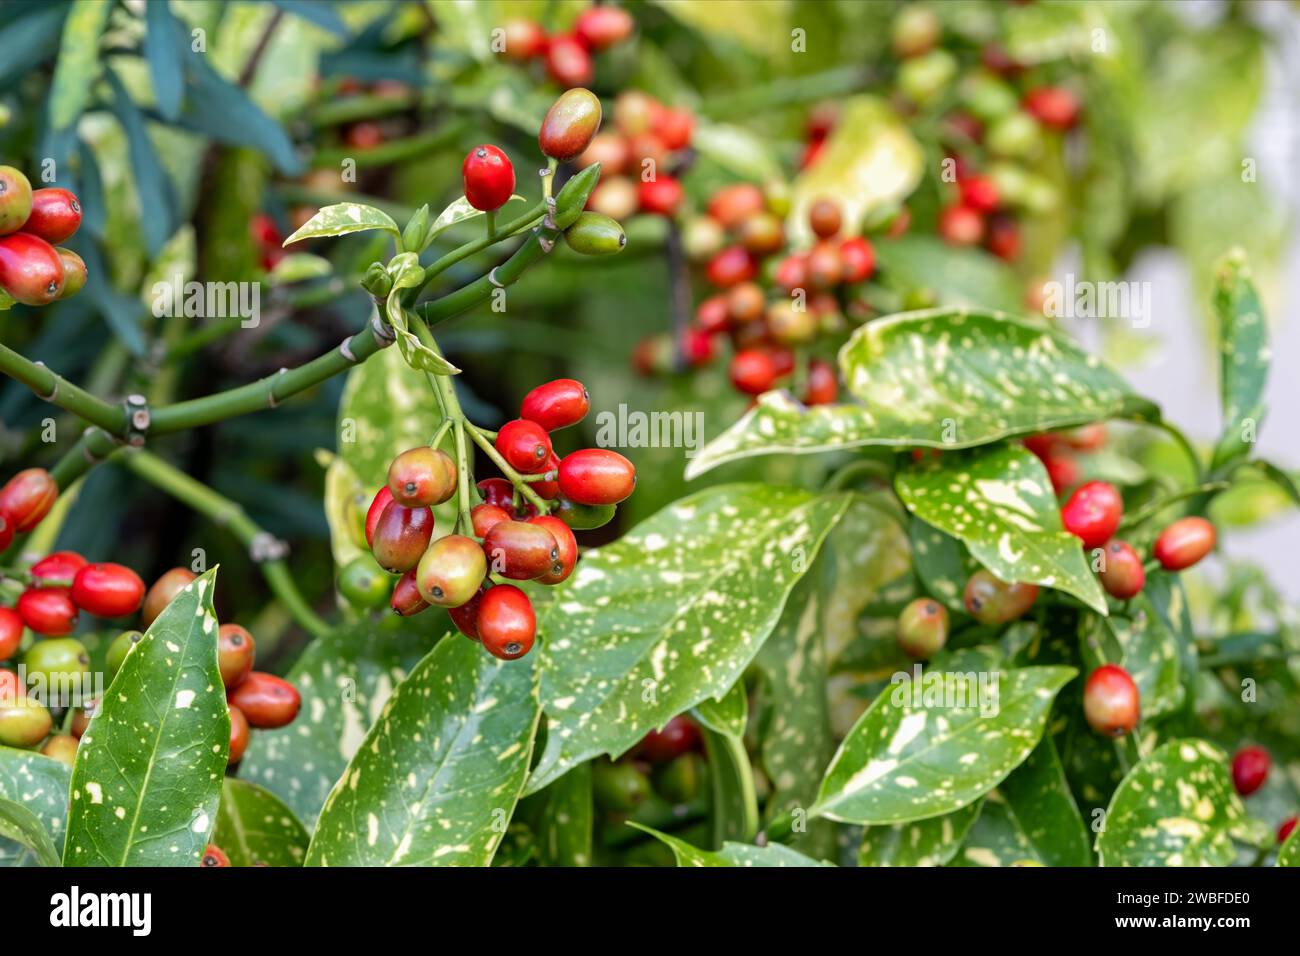 A large Aucuba Japonica shrub sometimes known as Japanese or spotted laurel. The UK garden plant has variegated leaves and red berries Stock Photo